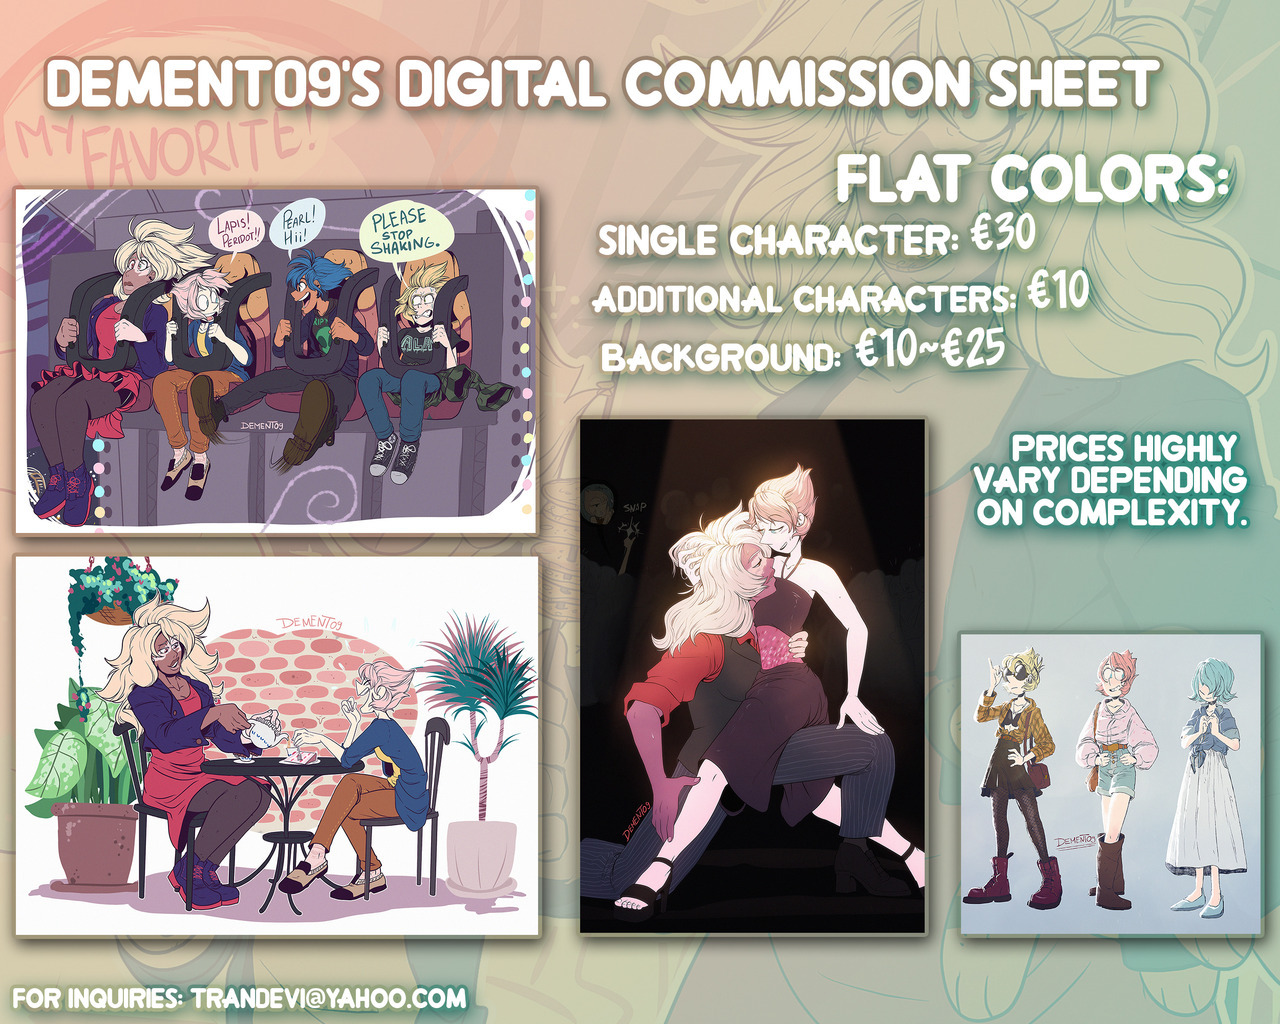 dement09:  dement09: &gt;TRADITIONAL COMMISSIONS INFO&lt; If you can’t